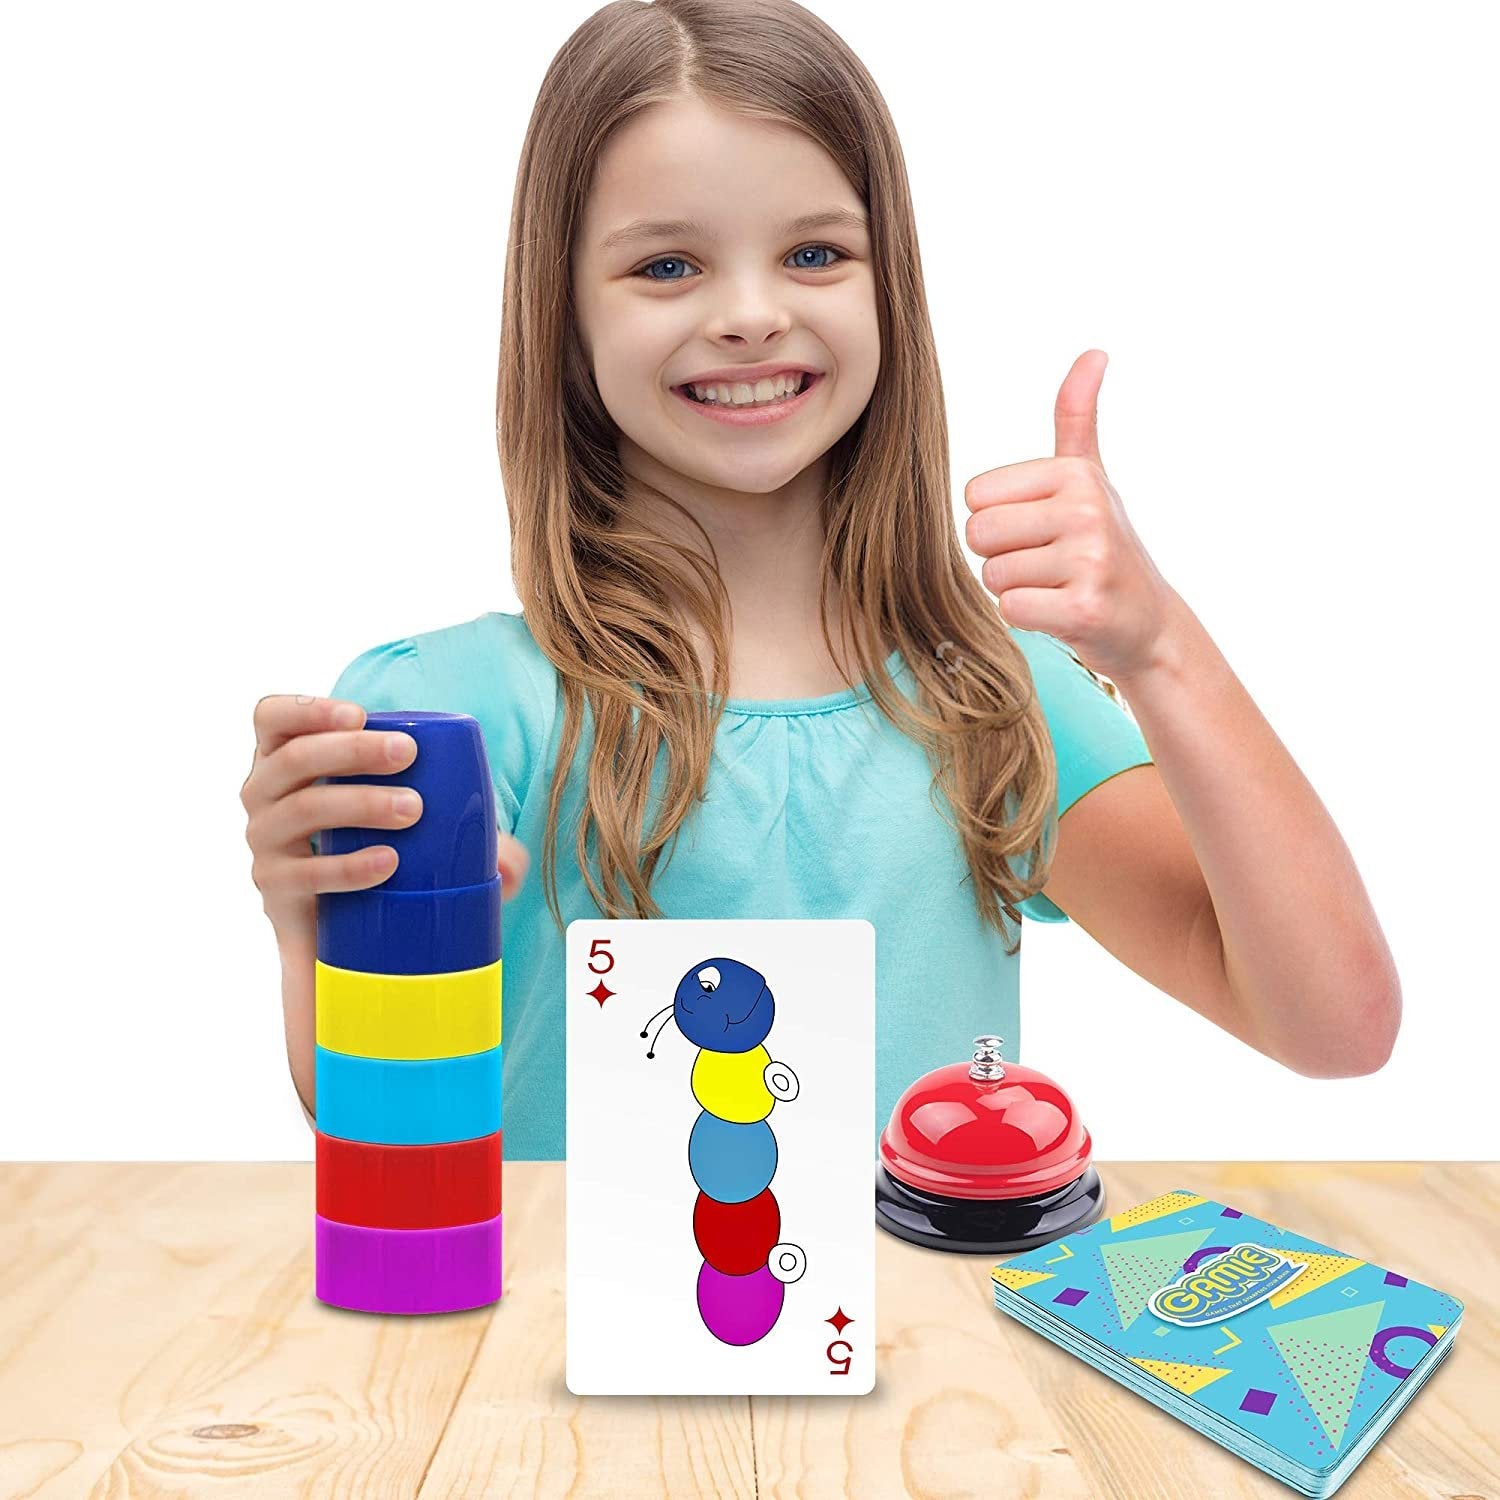 Gamie Stacking Cups Game - with 54 Challenges, 20 Stacking Cups, Bell and Instruction Sheet - Educational Color and Shape Matching Game - Classic Quick Stacks Set for Boys, Girls, Teens, Adults